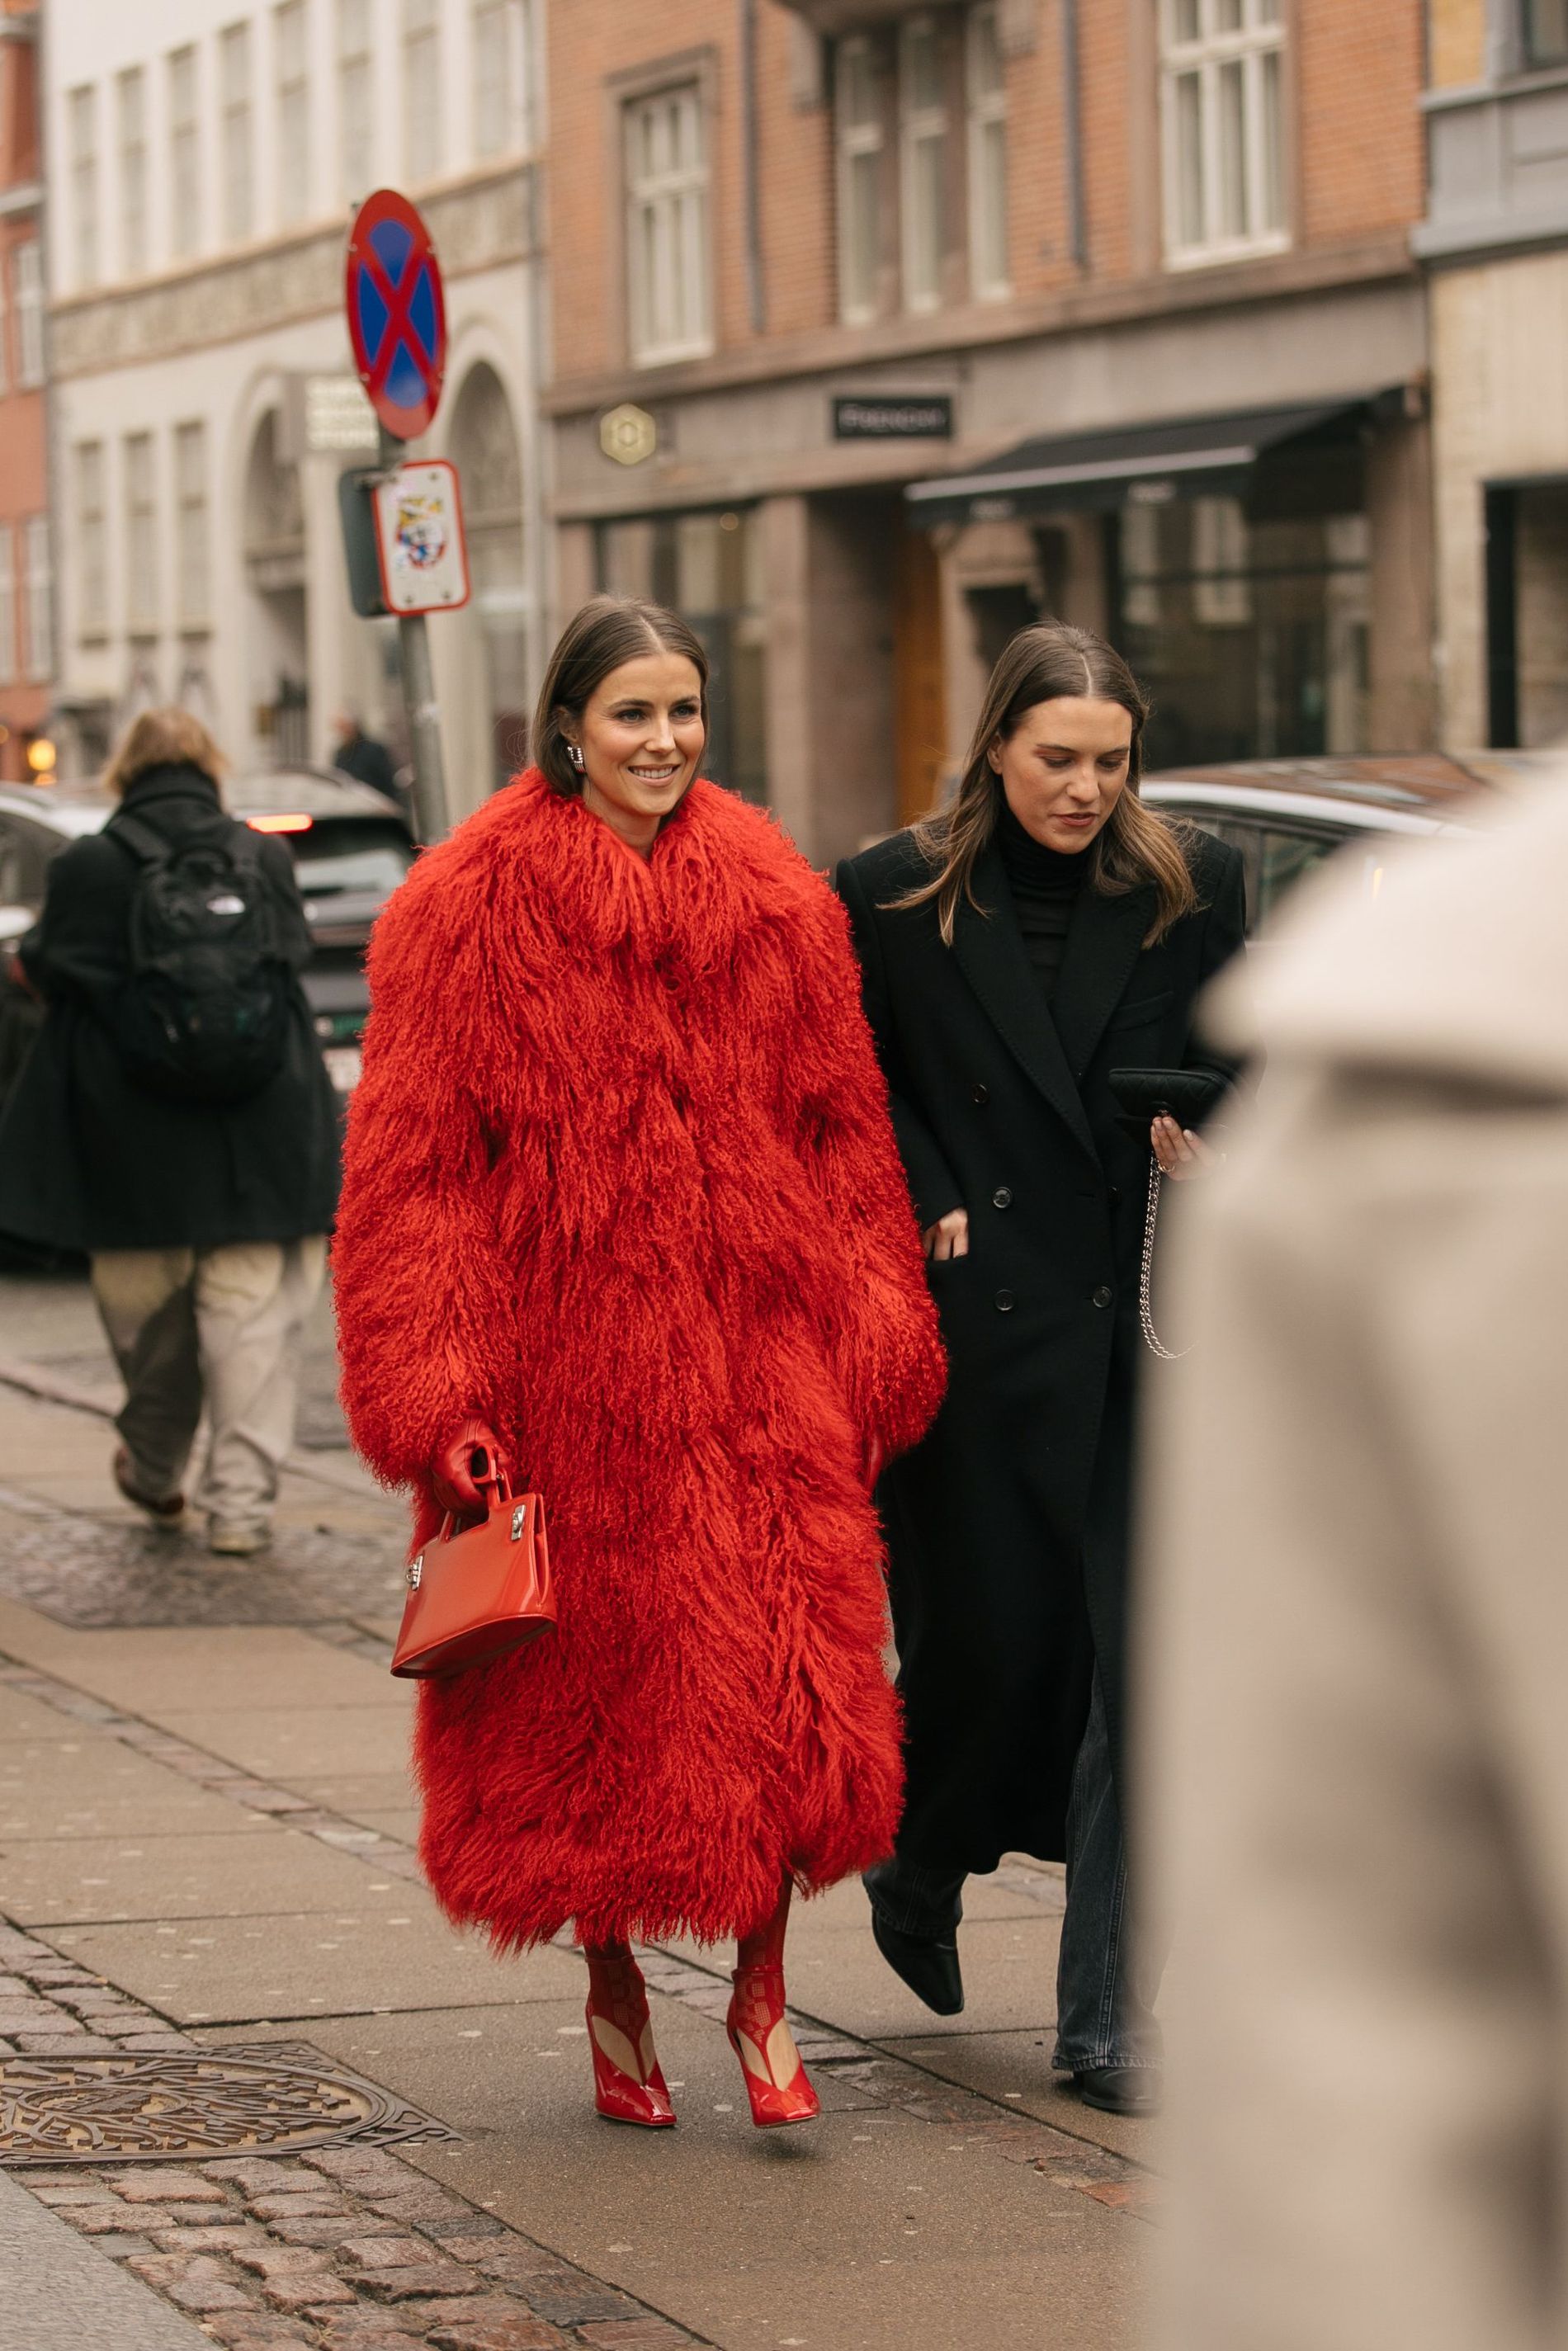 A guest at Copenhagen Fashion Week wears an all-red outfit featuring a faux fur coat